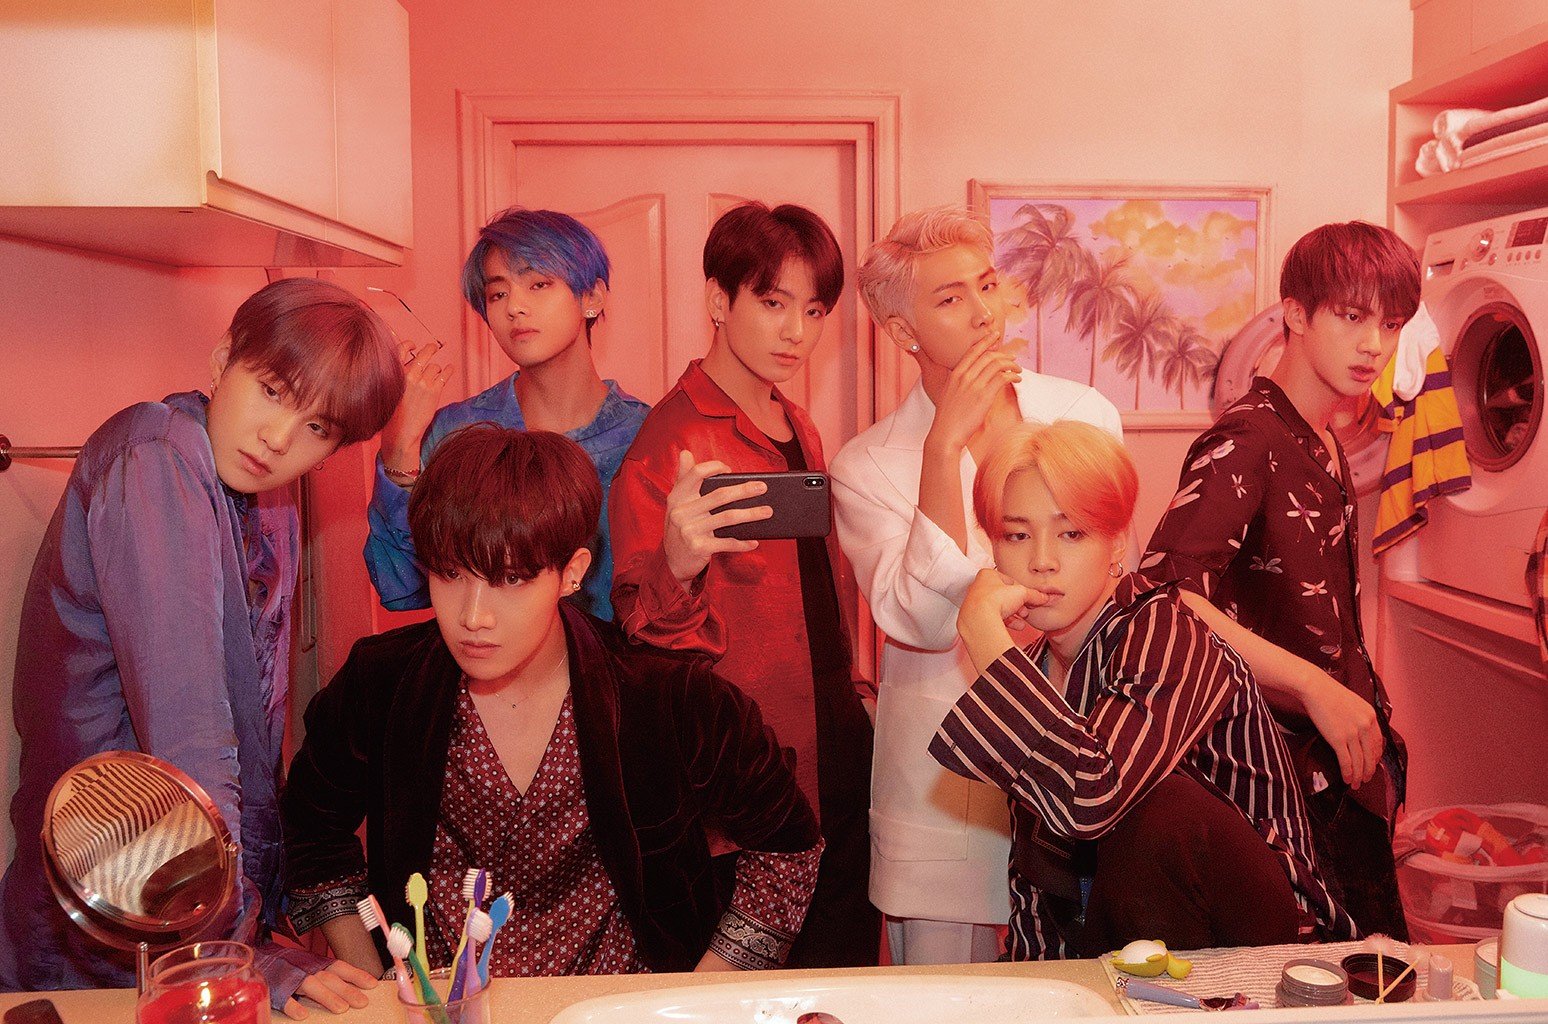 BTS have proved multi-platform pioneers by developing an interactive mobile game, where fans assume the role of the group’s manager.